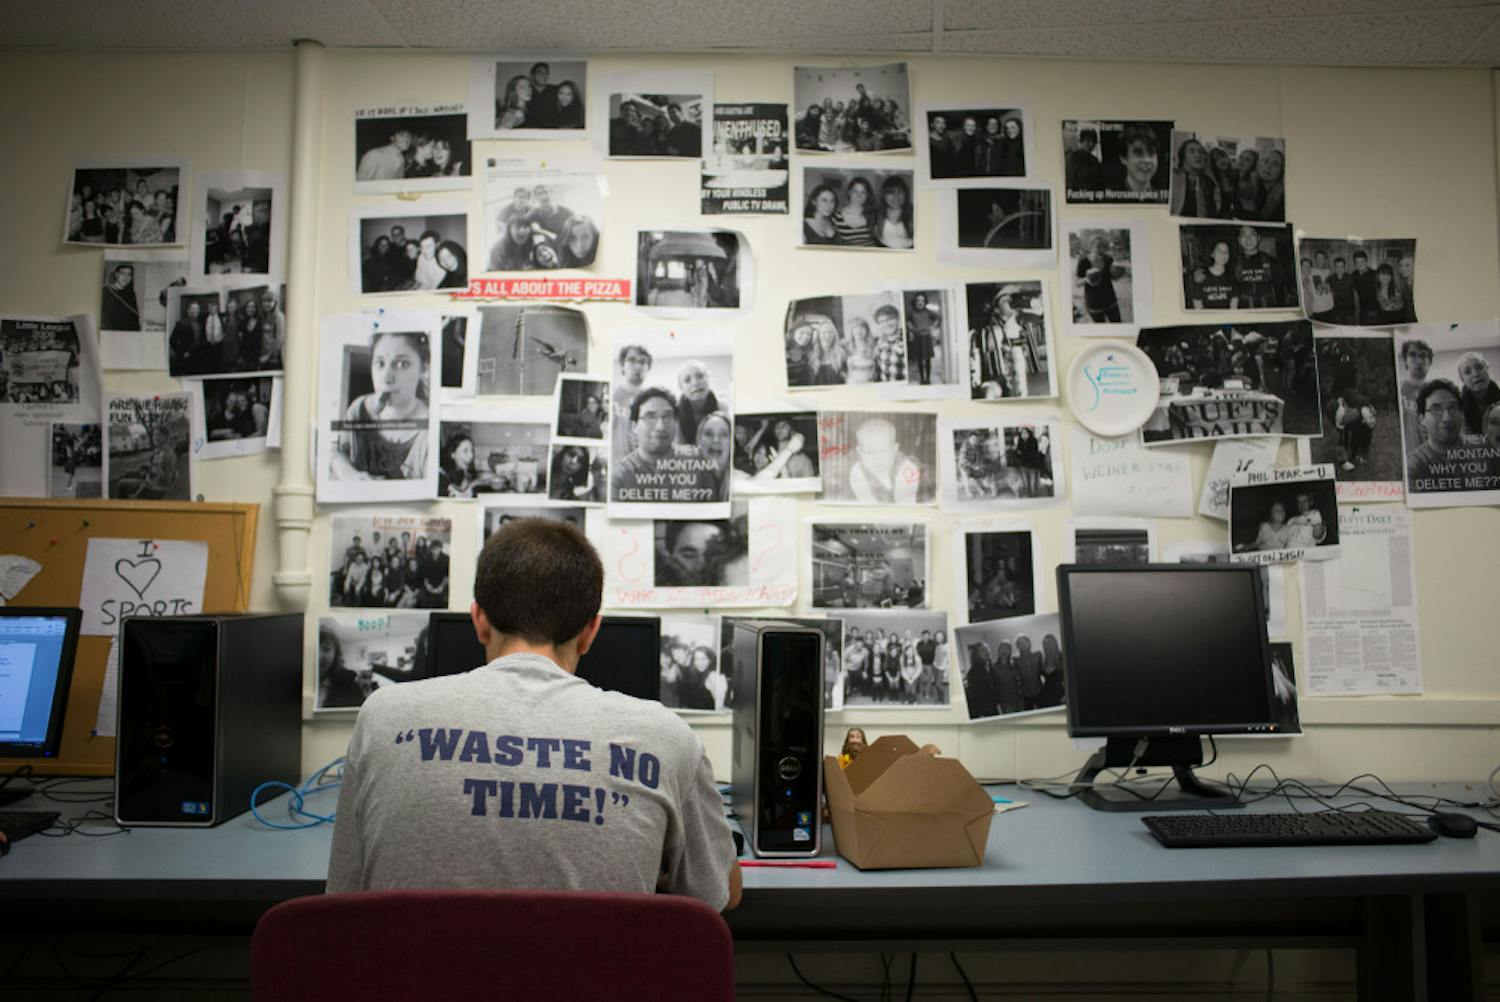 Behind the scenes in The Tufts Daily office in the basement of Curtis Hall on Sept. 1st, 2014, the night before the first fall issue.